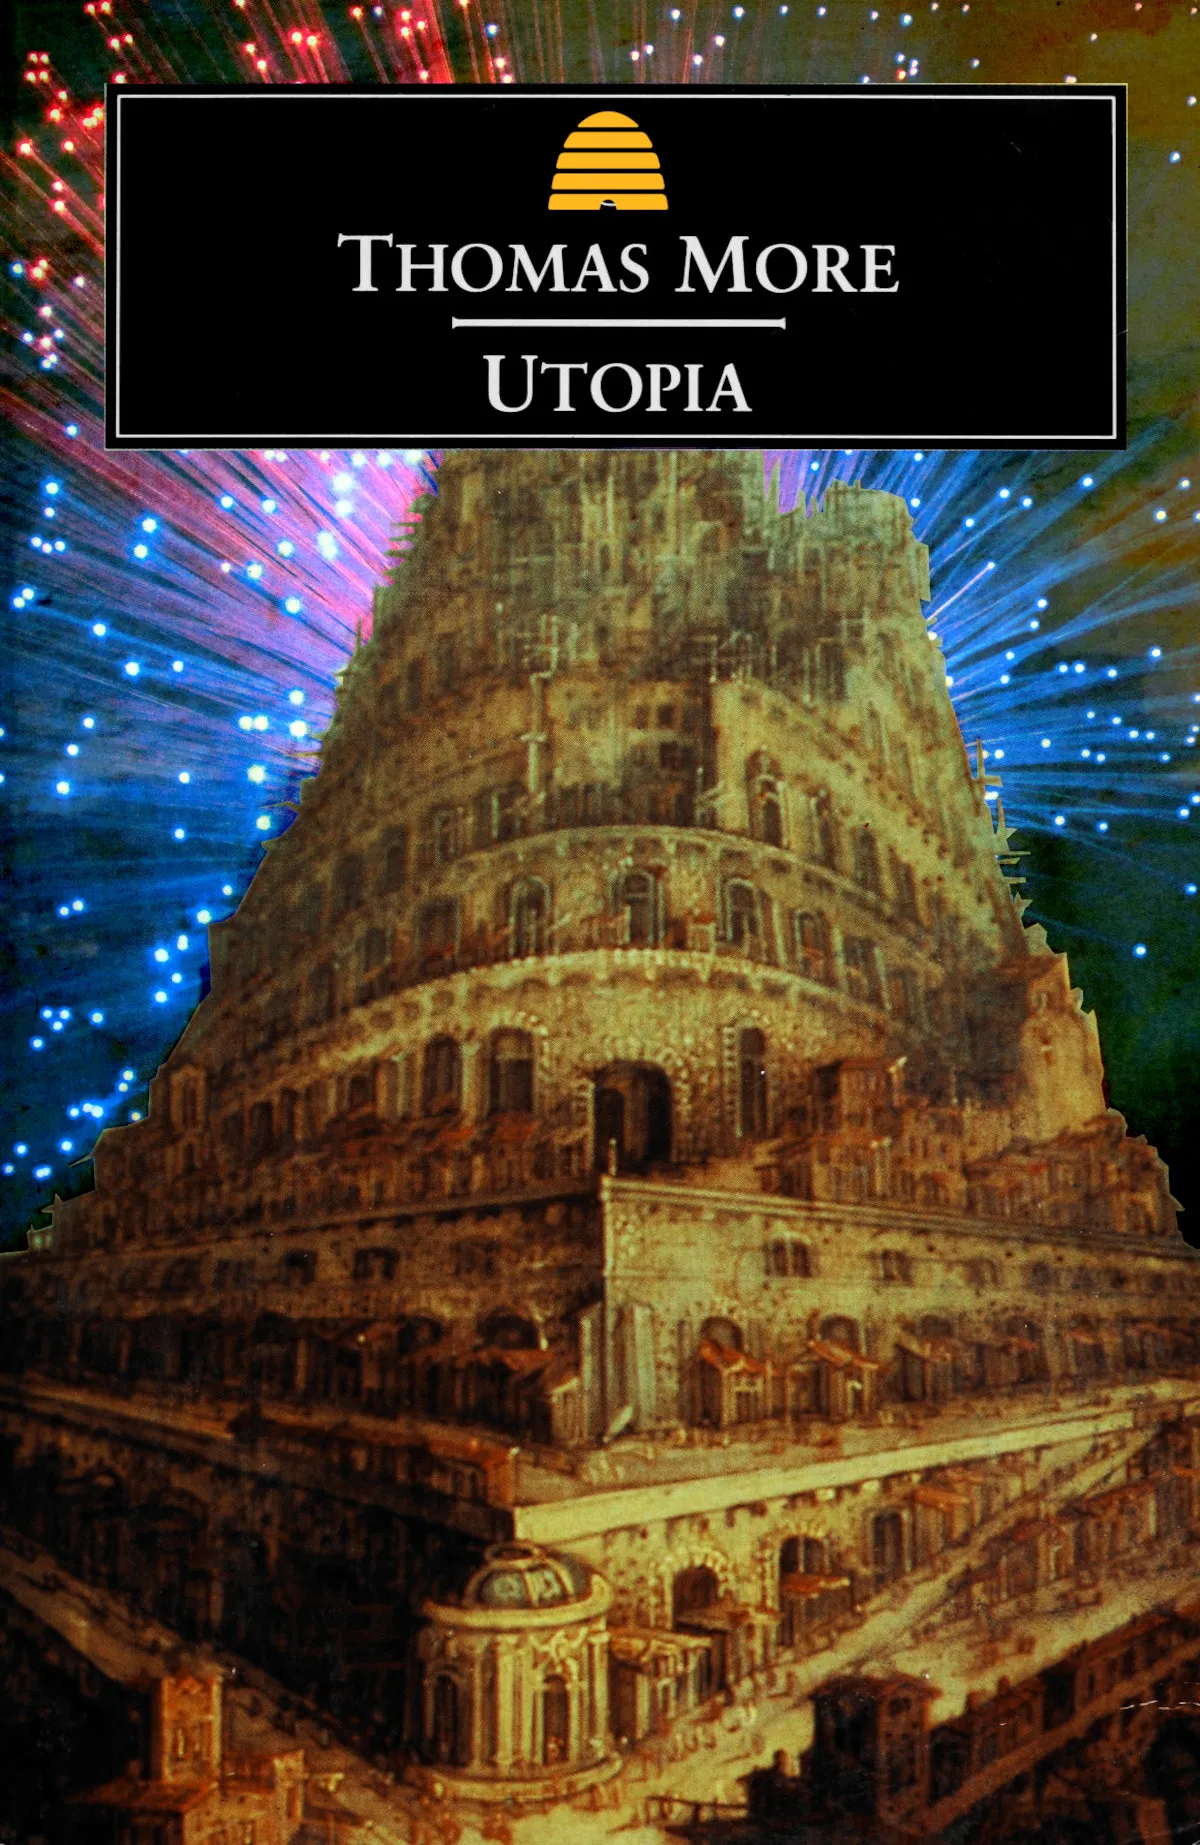 The cover of the Penguin Classics edition of Thomas More’s ‘Utopia.’ It has been altered to add a glowing halo of fiber optics around the central tower. The Penguin logo has been replaced with the beehive from the Utah state flag. Image: 4028mdk09 (modified) https://commons.wikimedia.org/wiki/File:Rote_LED_Fiberglasleuchte.JPG CC BY-SA 3.0 https://creativecommons.org/licenses/by-sa/3.0/deed.en